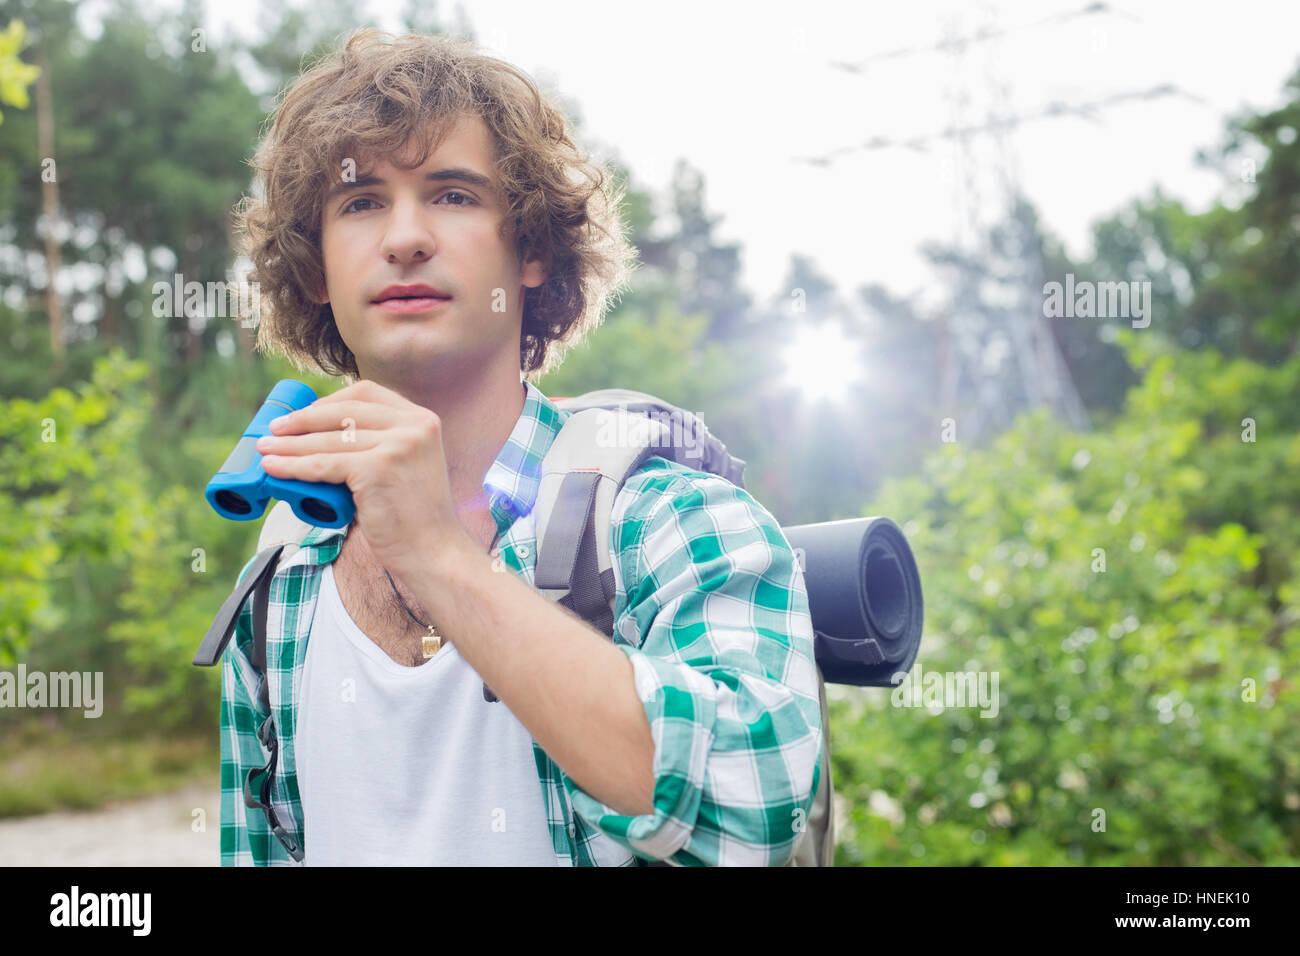 Young male hiker with binoculars in forest Stock Photo